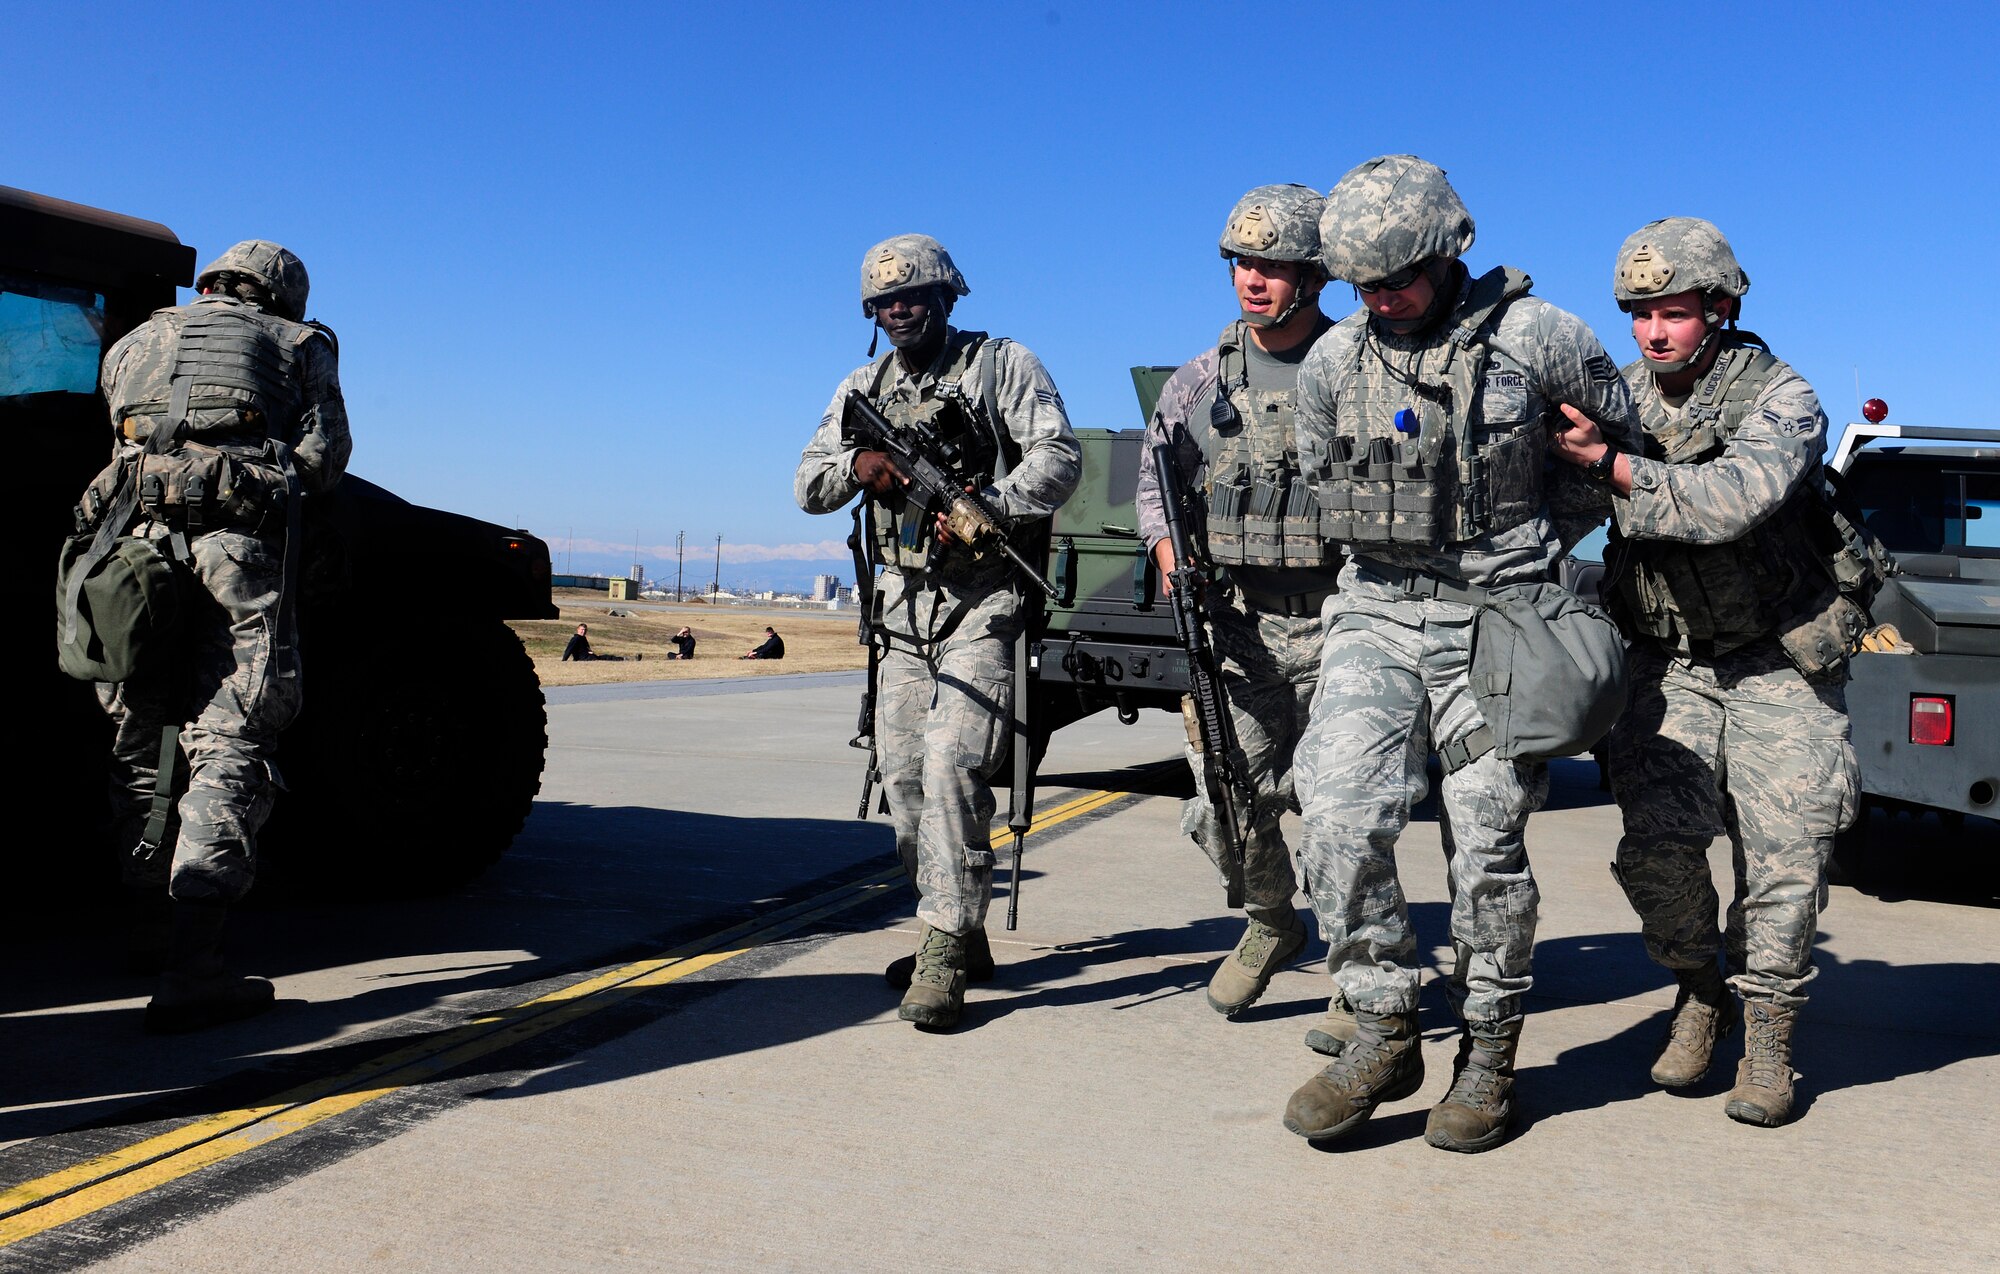 Airmen from the 39th Security Forces Squadron apprehend a simulated suspect during a wing exercise Jan. 15, 2016, at Incirlik Air Base, Turkey. The defenders responded to simulated opposing forces, arrested suspects and practiced body searching techniques. (U.S. Air Force photo by Senior Airman Krystal Ardrey/Released)